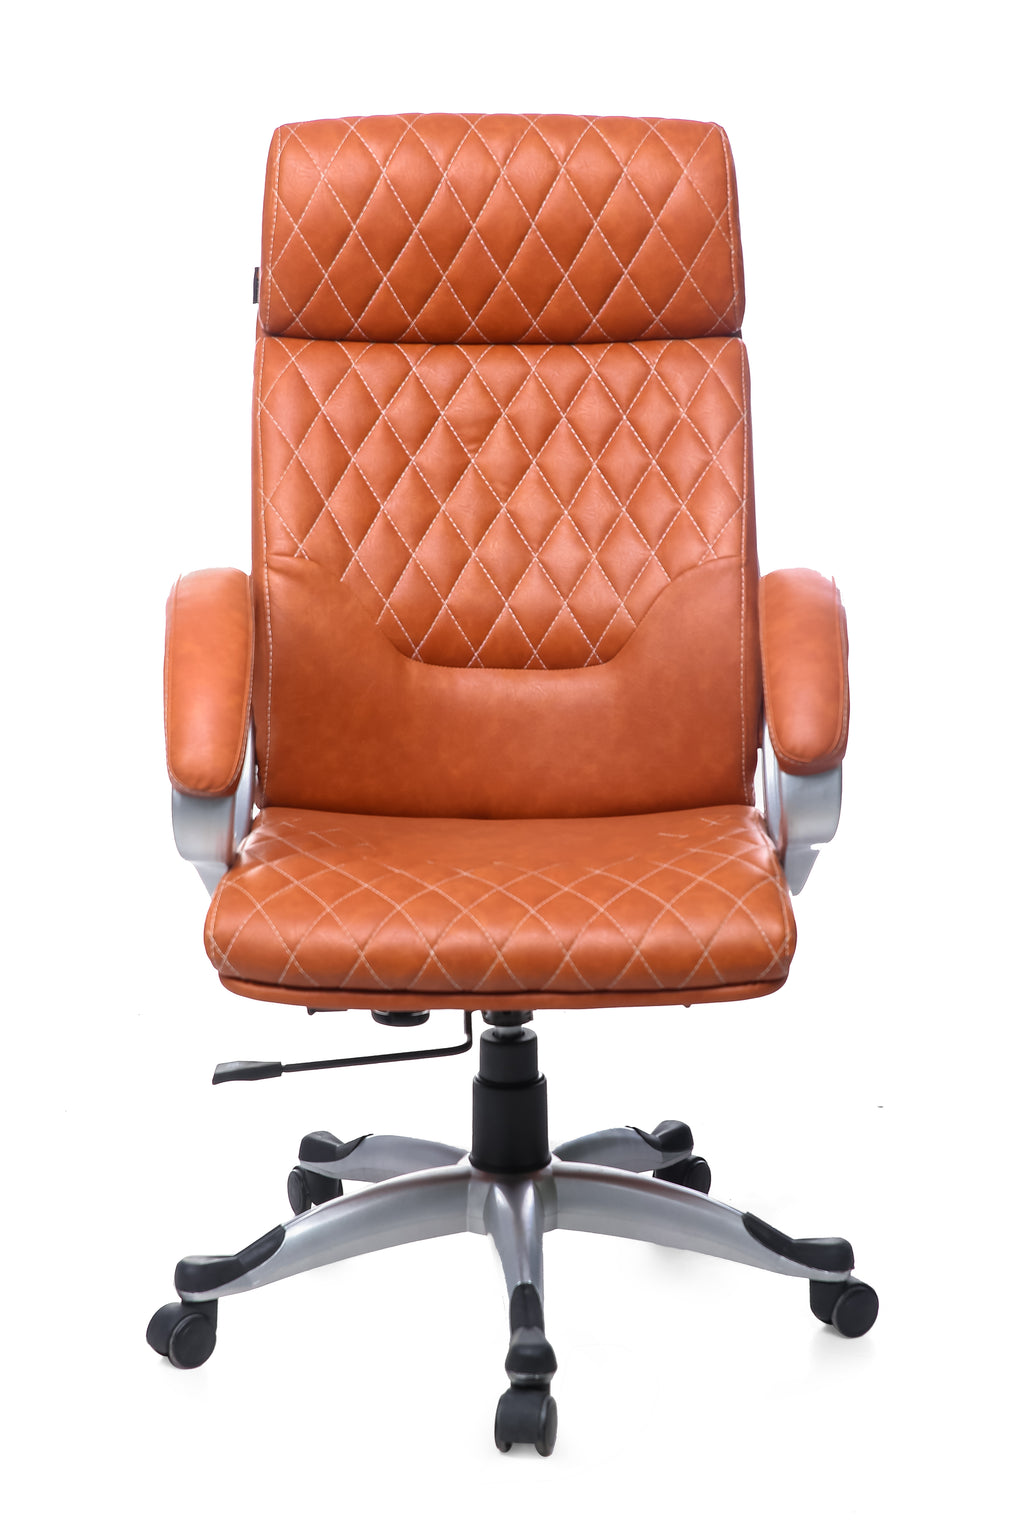 Detec™ High Back Executive Office Chair in TAN Color